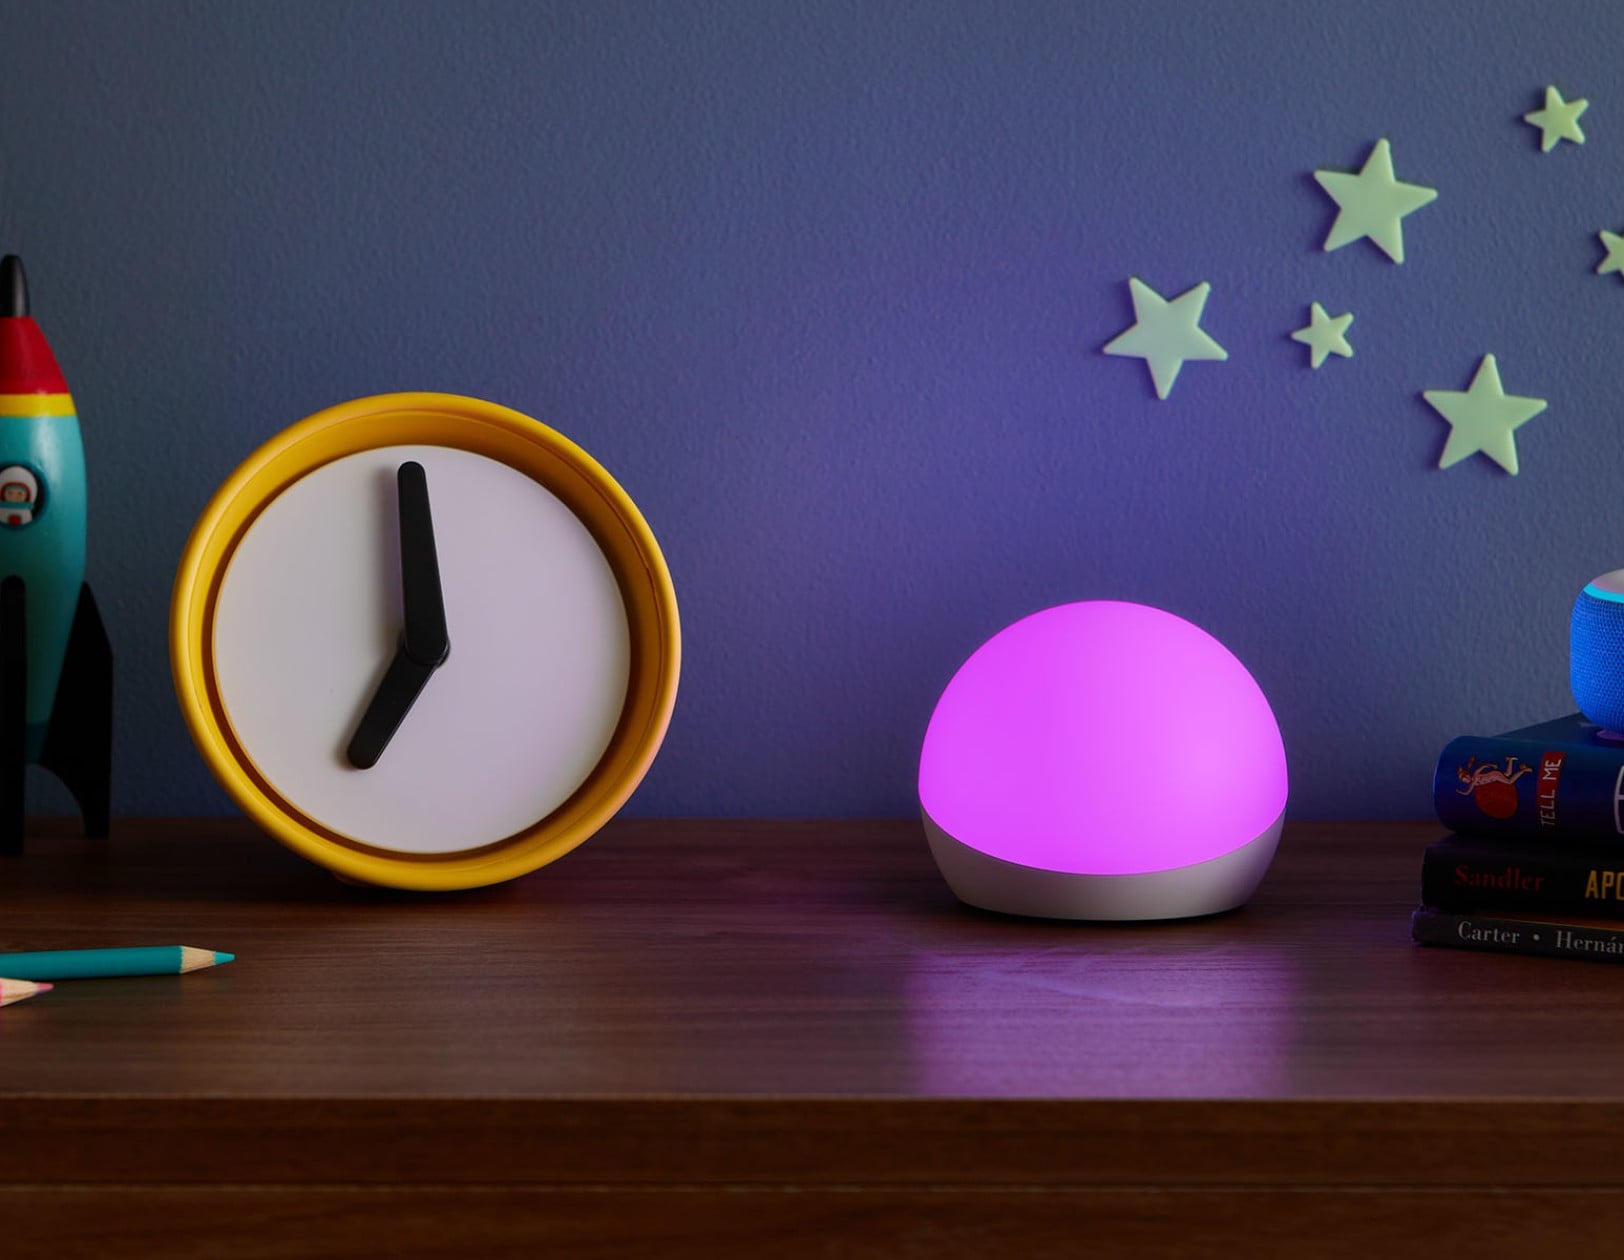 Echo Glow is so cheap, Amazon will sell a ton